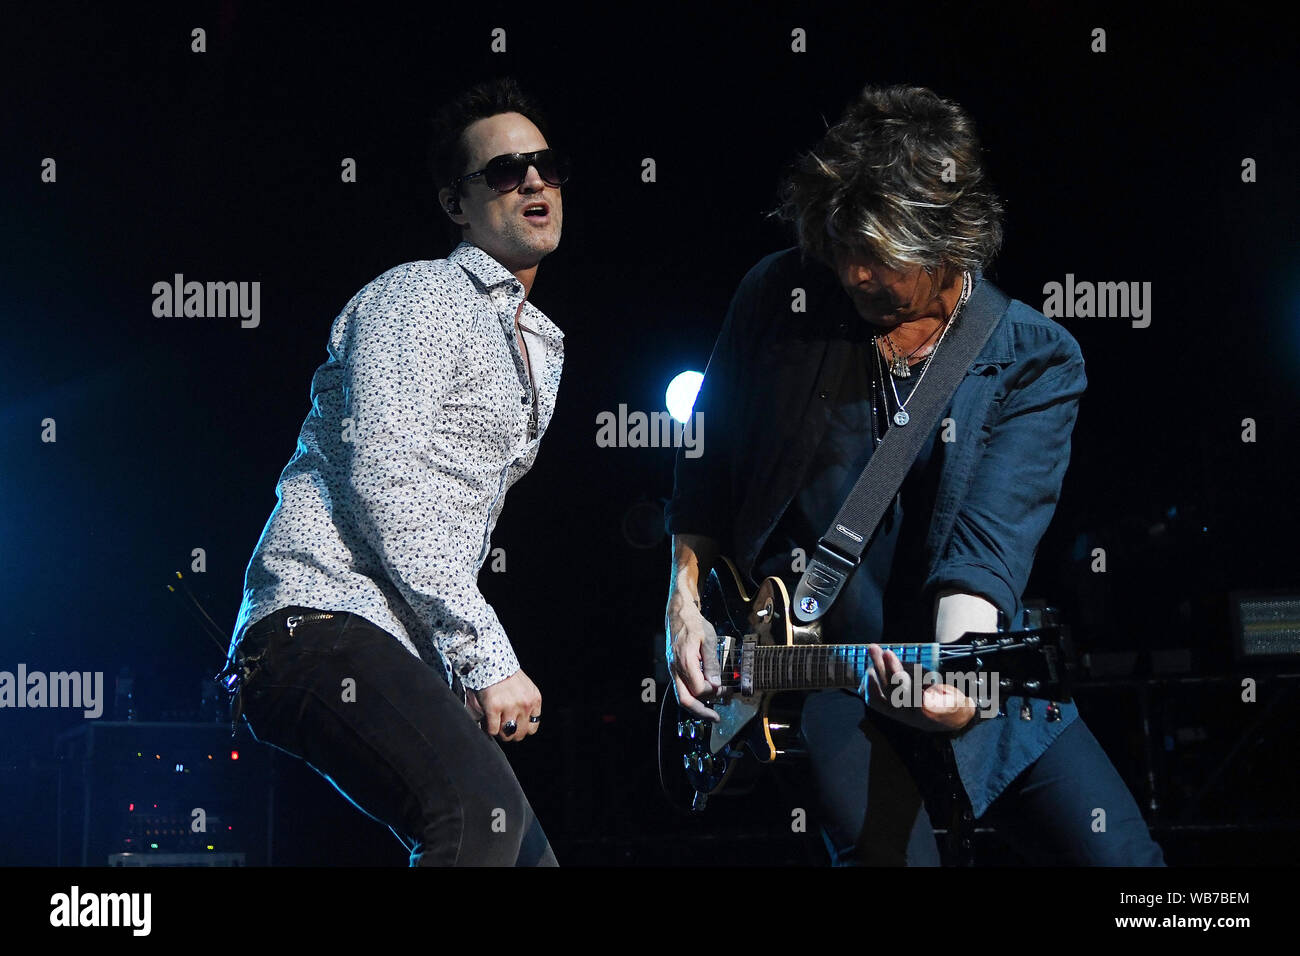 Rio de Janeiro, February 15, 2019. Vocalist Jeff Gutt and guitarist Dean DeLeo, from the band Stone Temple Pilots, during a show at Km de Vantagens. Stock Photo